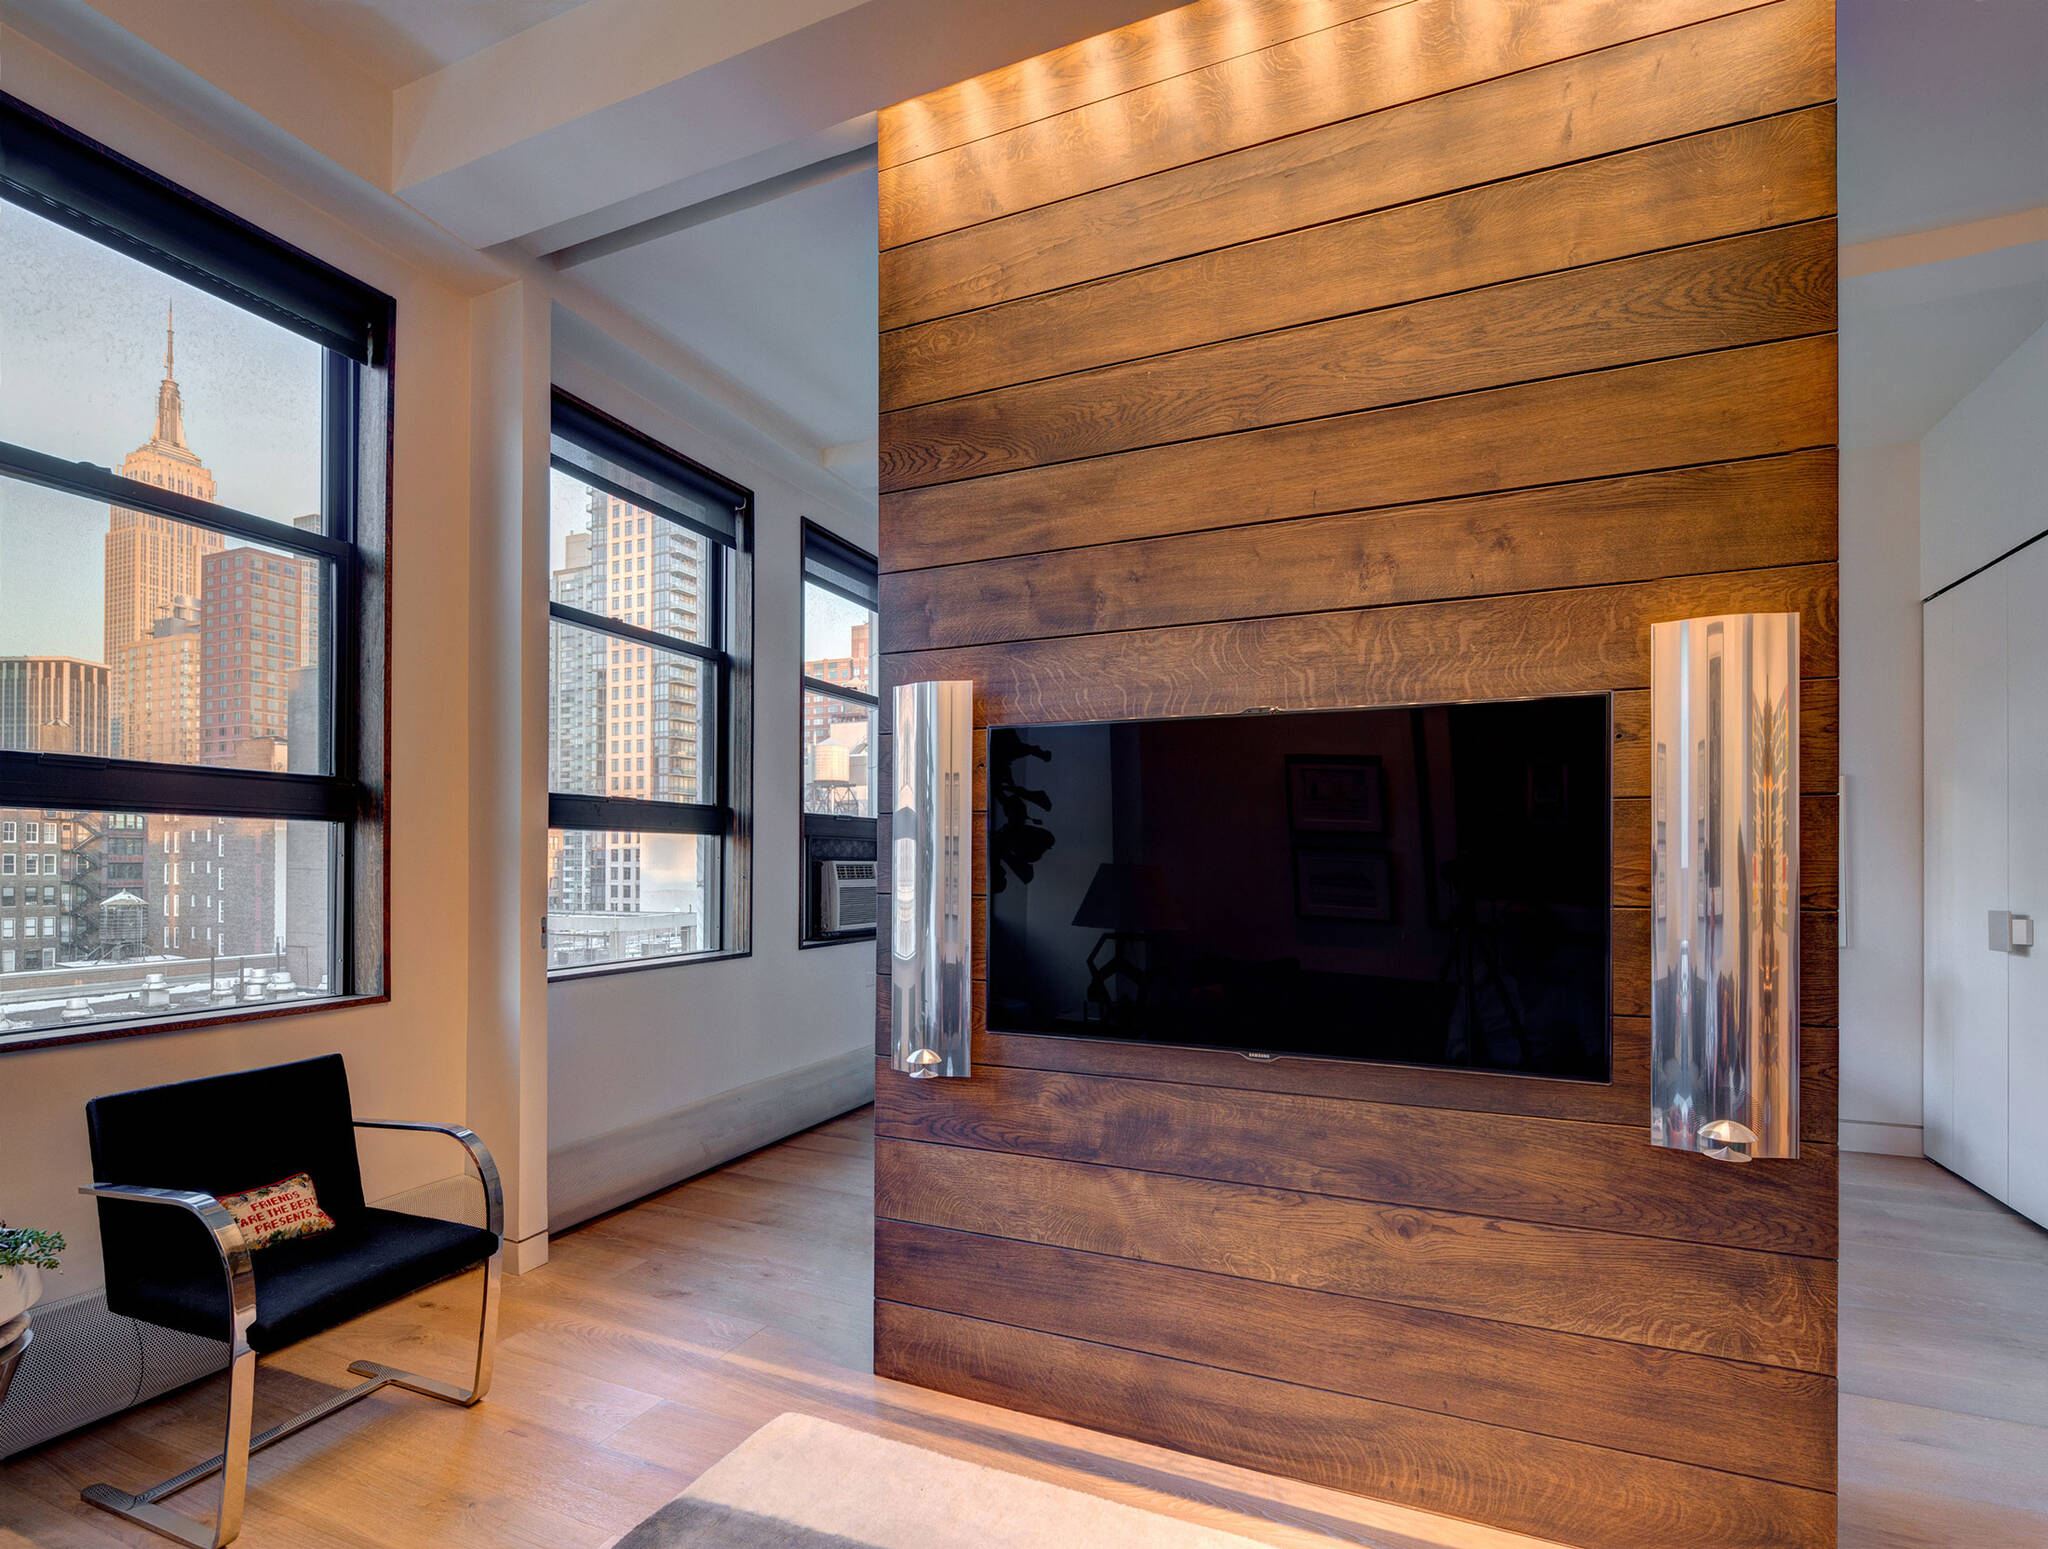 Empire State Building view from the living room of the residence renovation project in the Chelsea Mews building on the Flatiron District in Manhattan, New York City designed by the architecture studio Danny Forster & Architecture